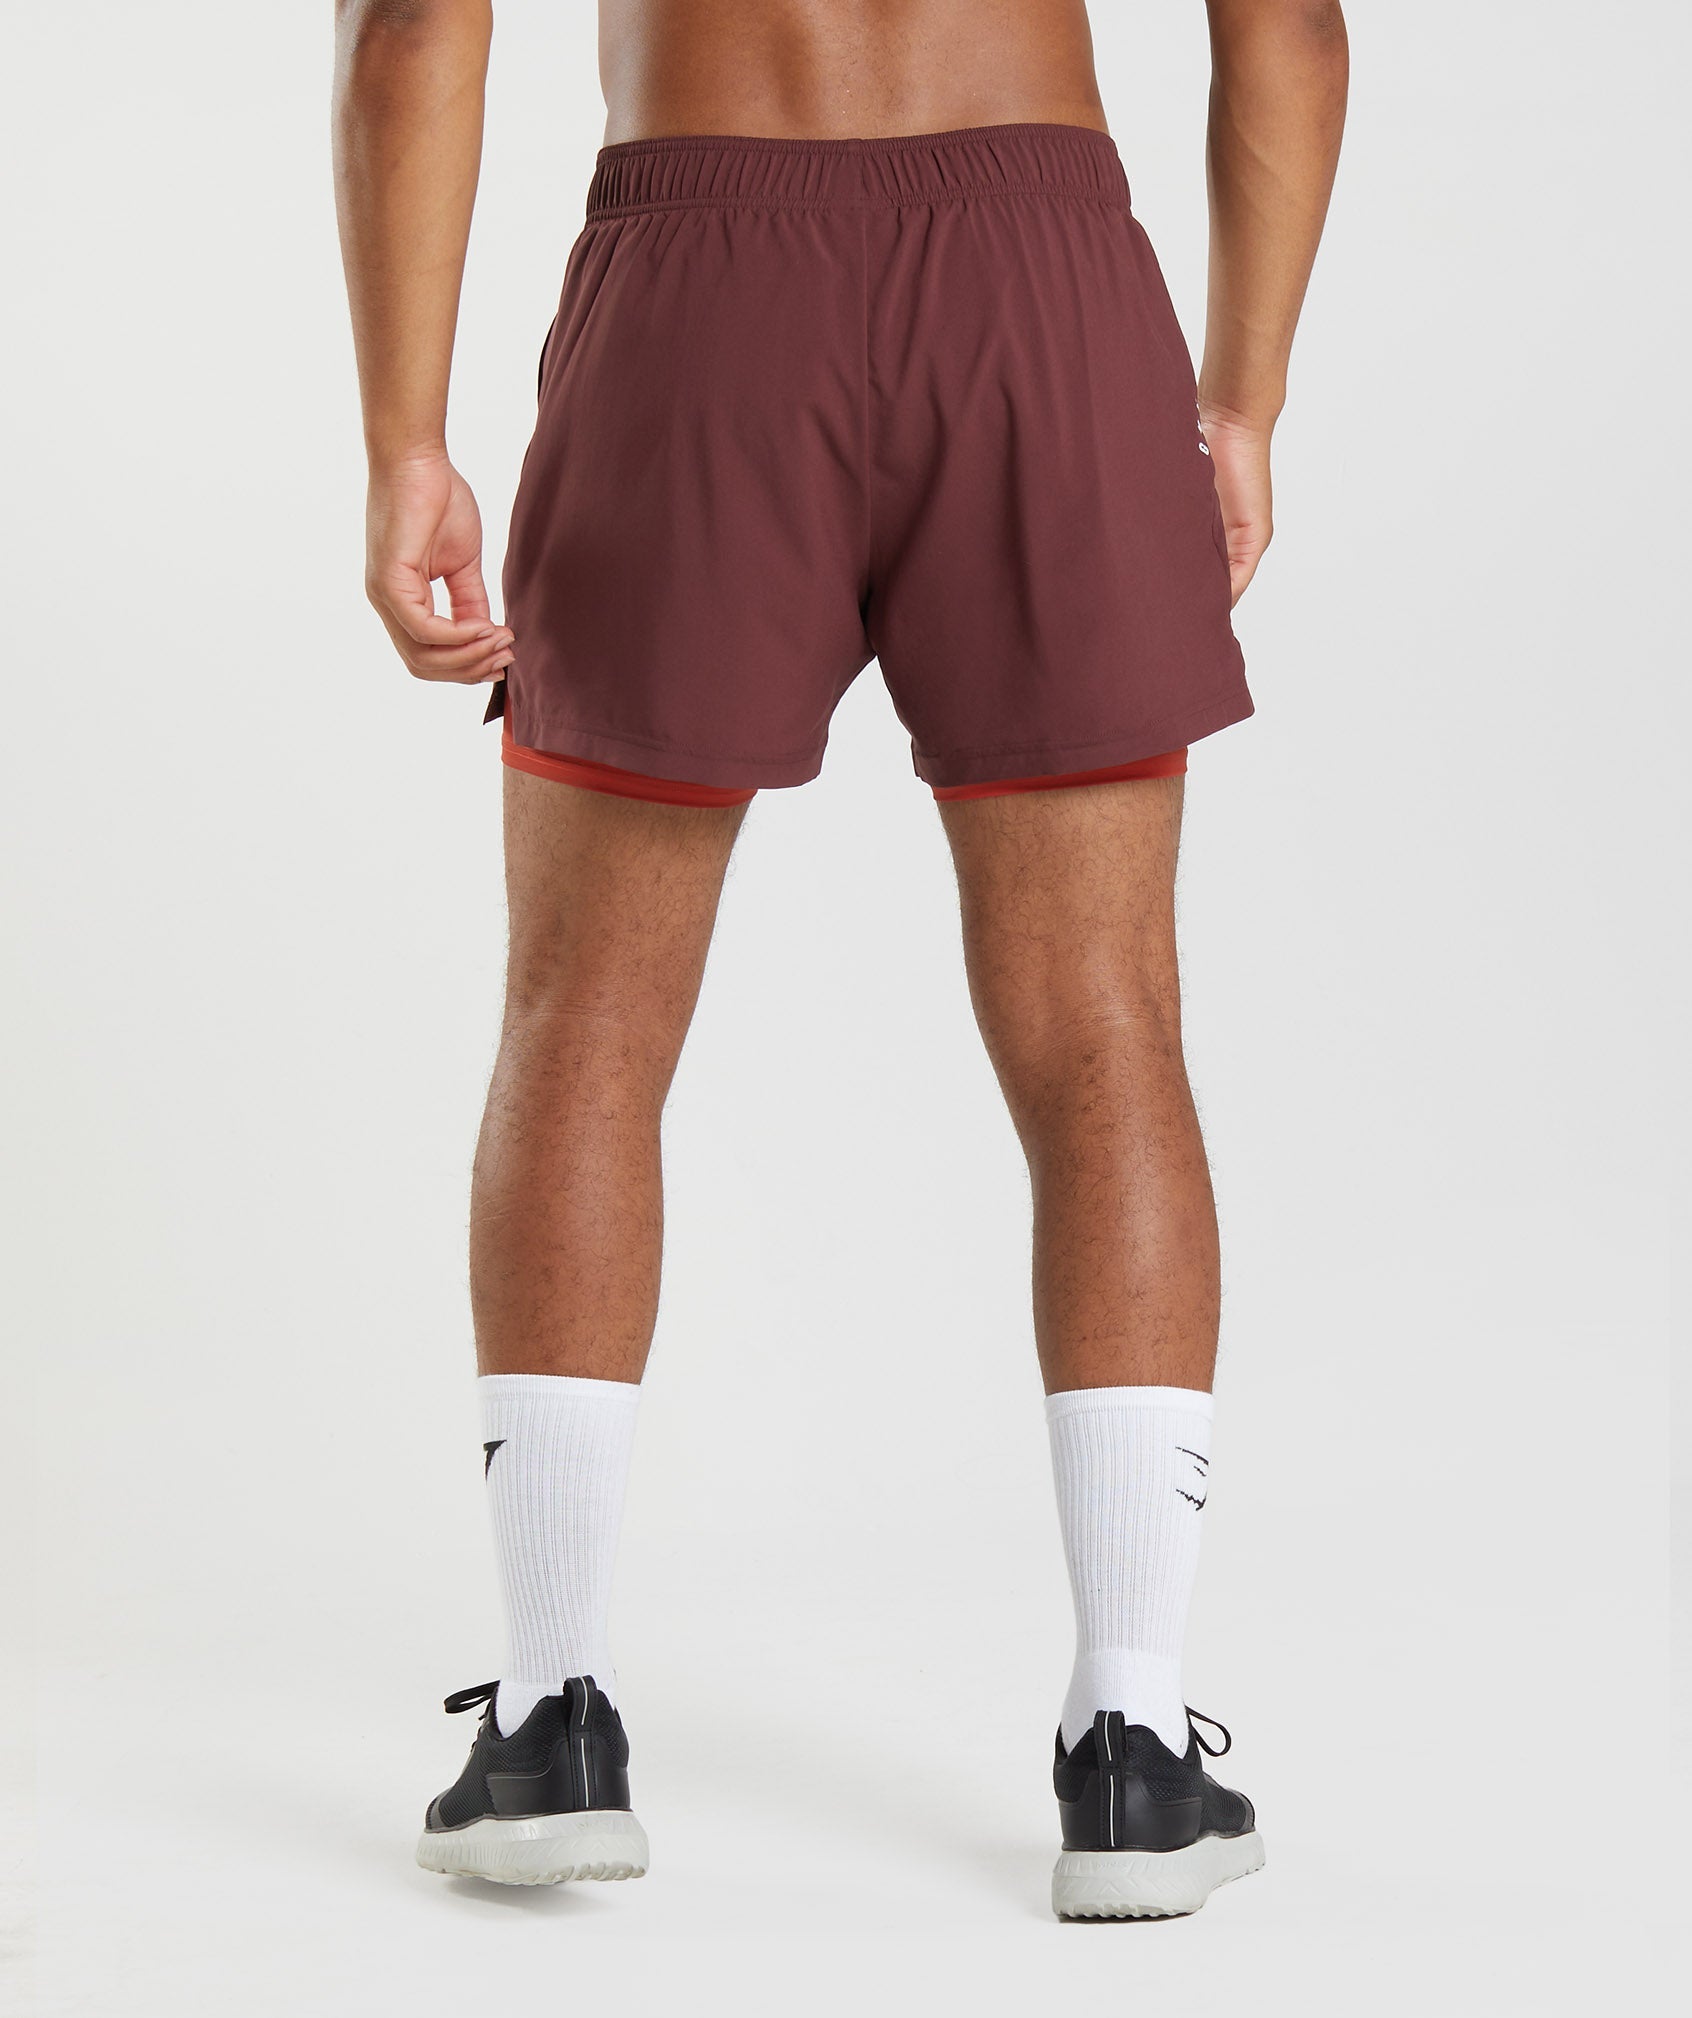 Sport 5" 2 In 1 Shorts in Baked Maroon/Salsa Red